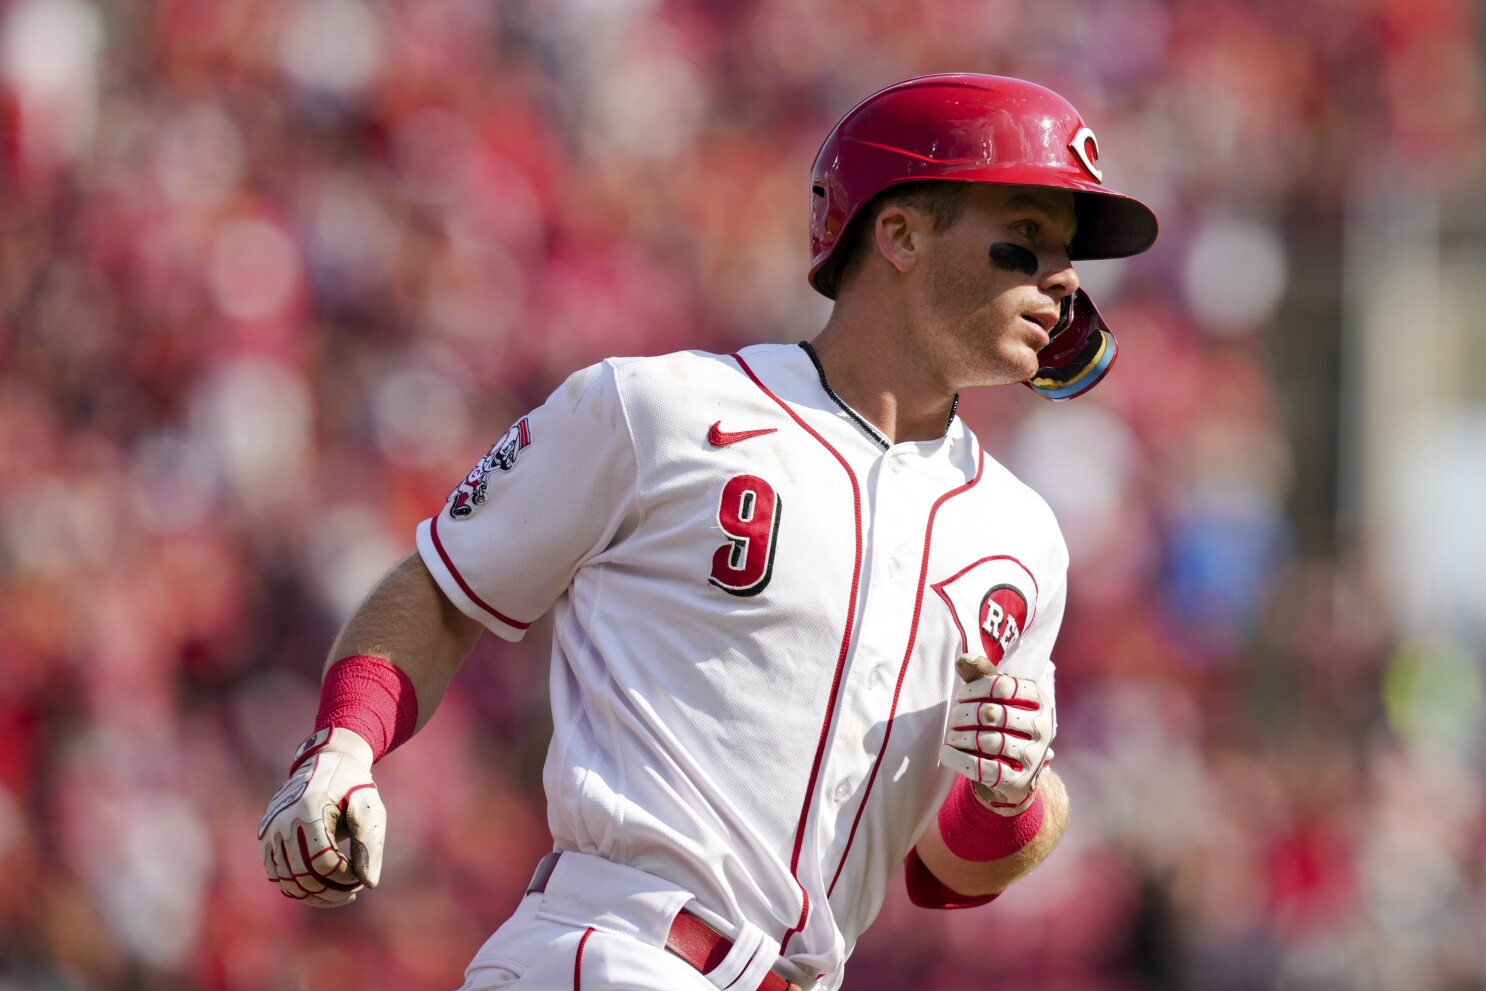 Reds hit back-to-back-to-back homers in 6th in 4-2 win over the